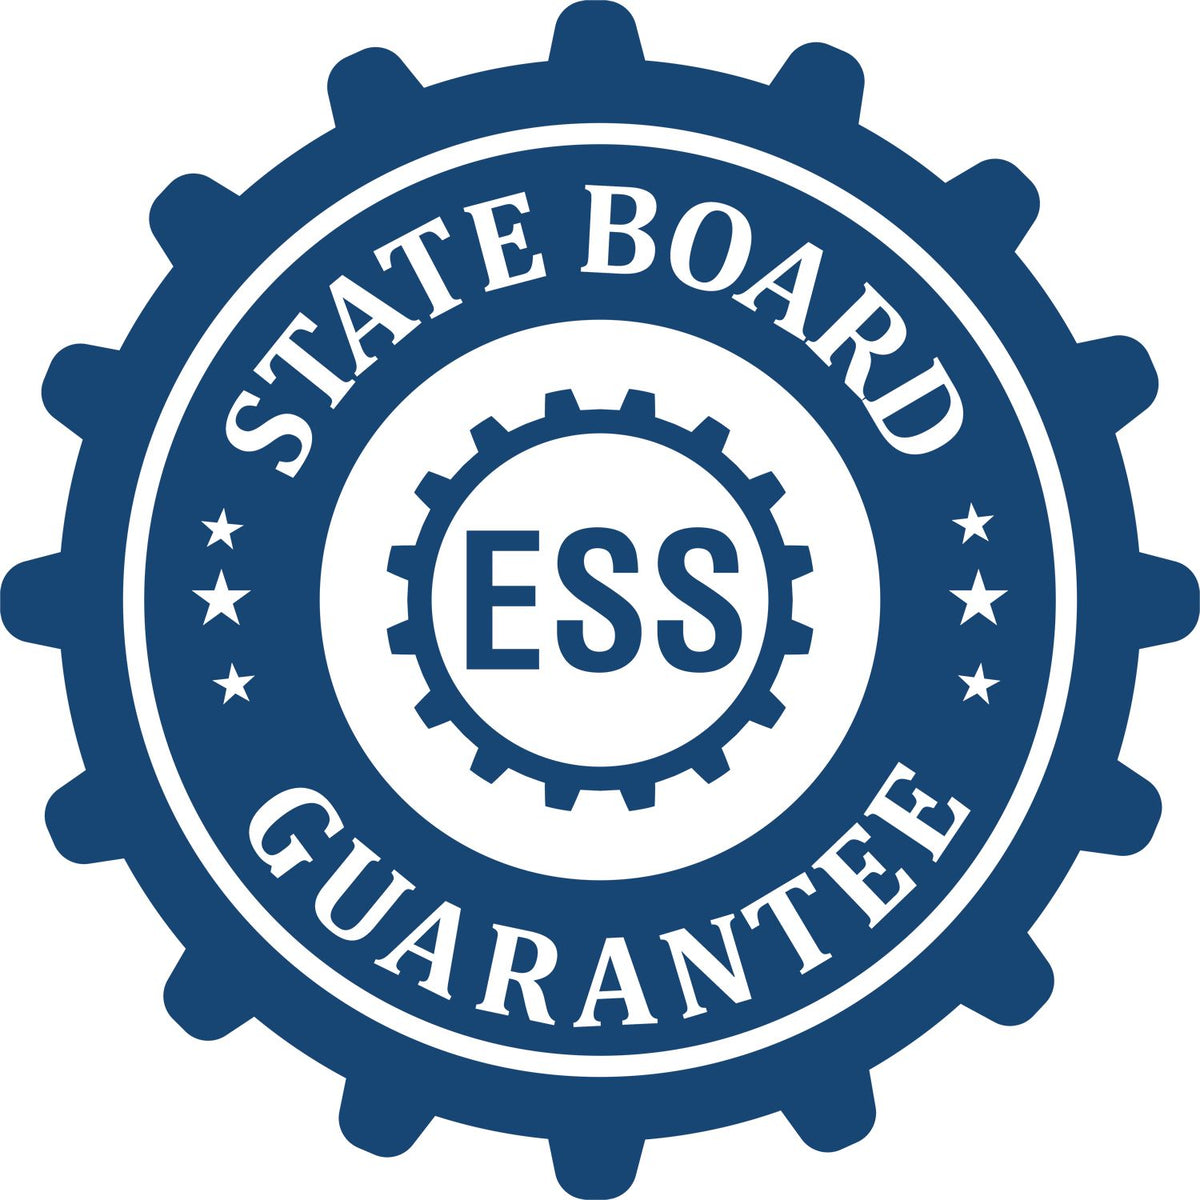 An emblem in a gear shape illustrating a state board guarantee for the Maine Landscape Architectural Seal Stamp product.